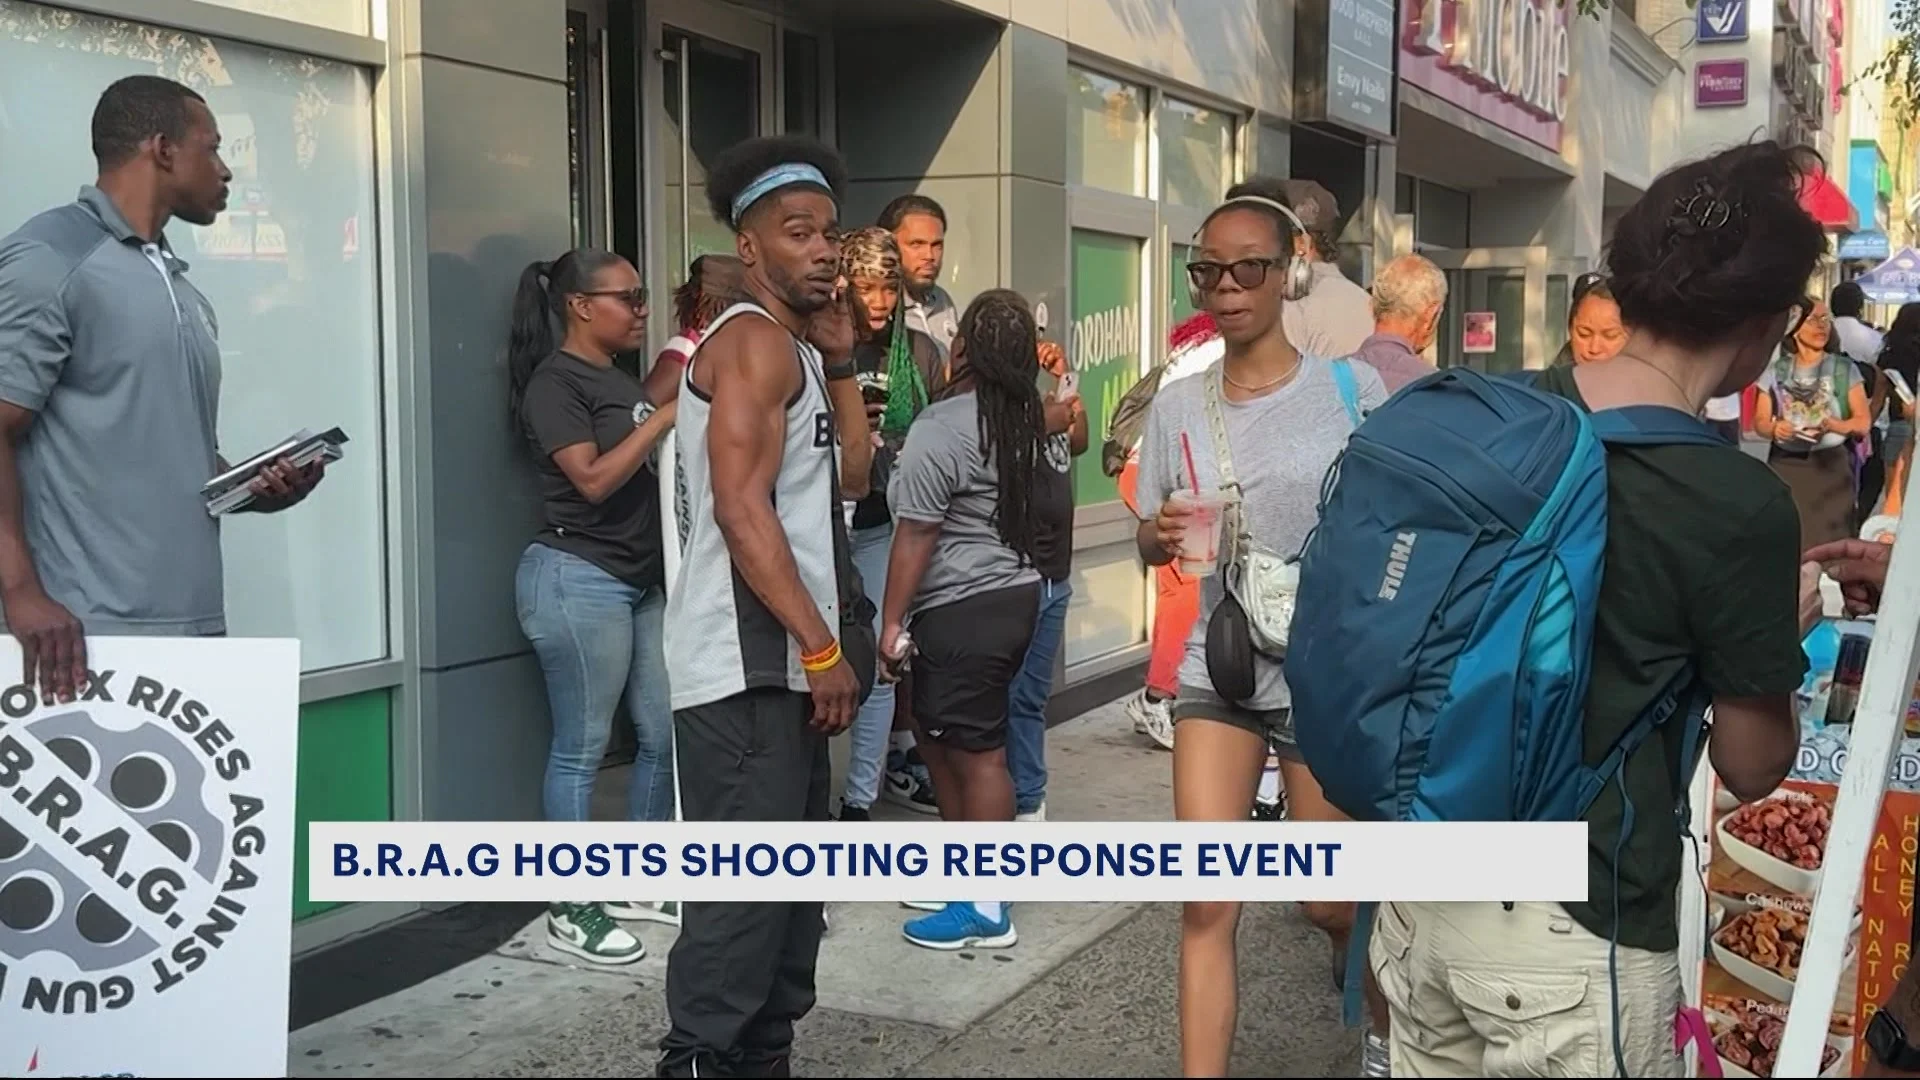 Anti-violence groups call for end to shooting violence in the Bronx 